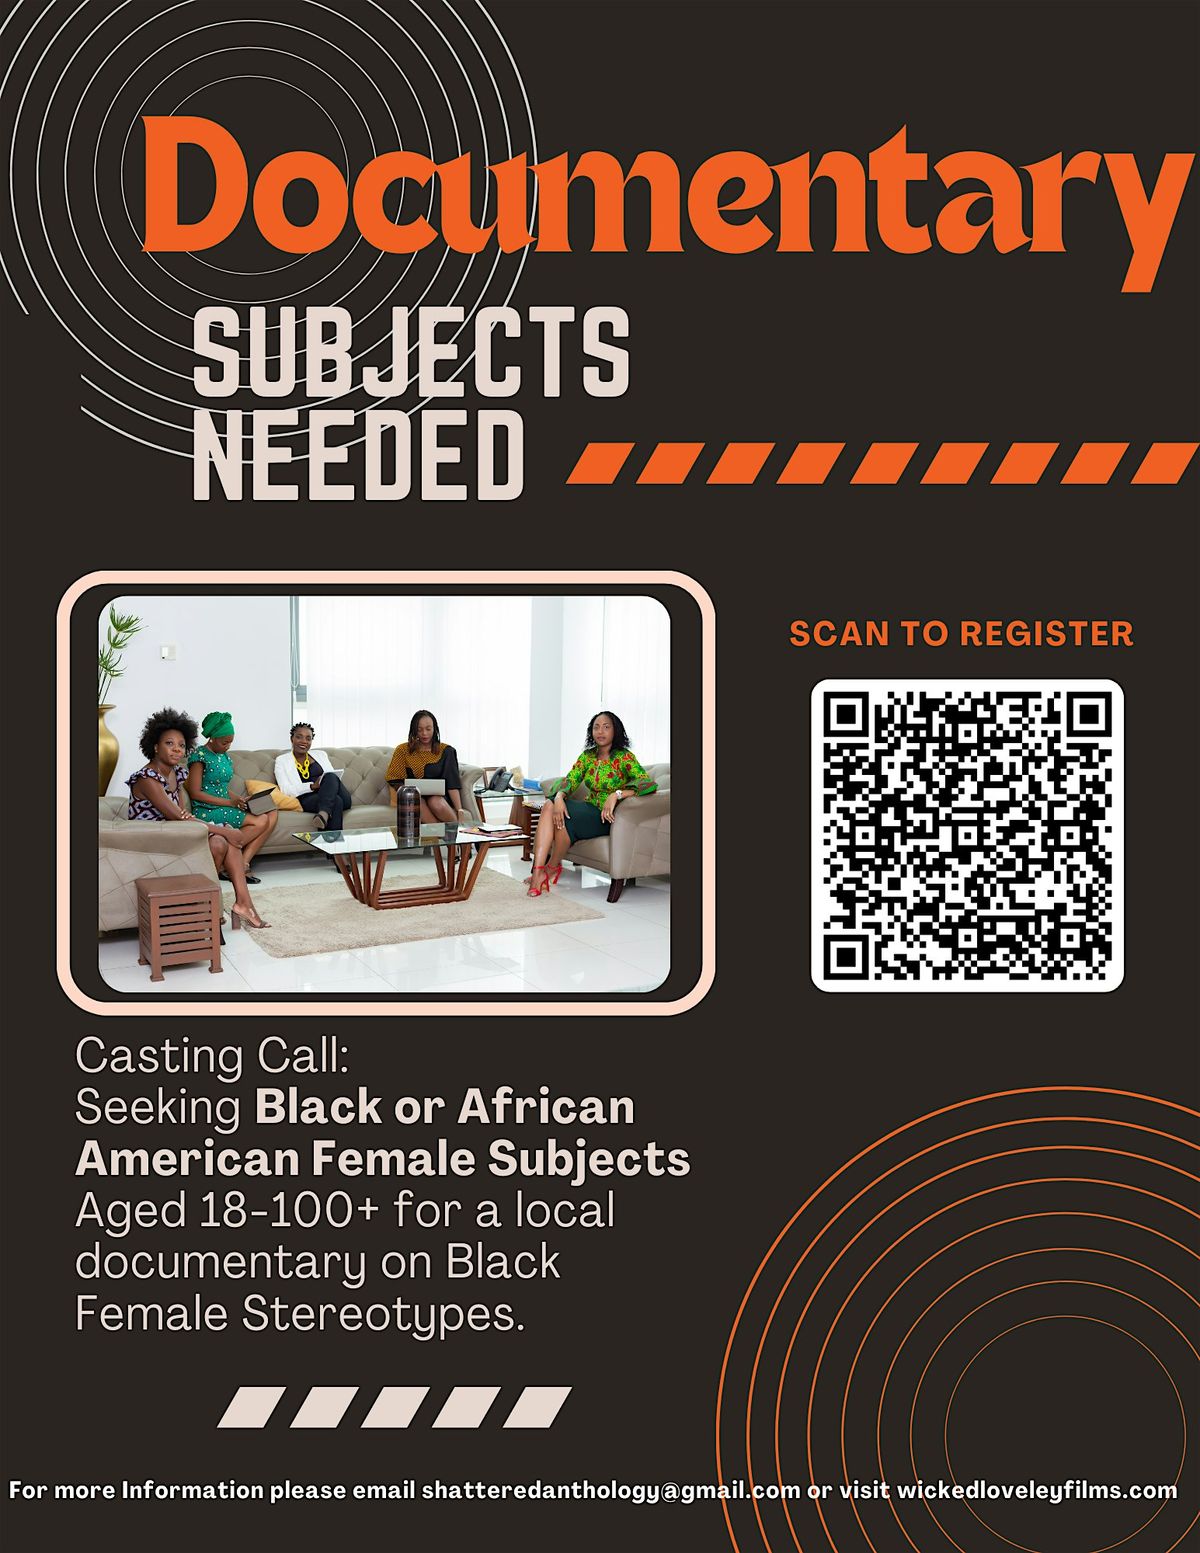 SHATTERED - Black Women's Documentary Discussion Circle